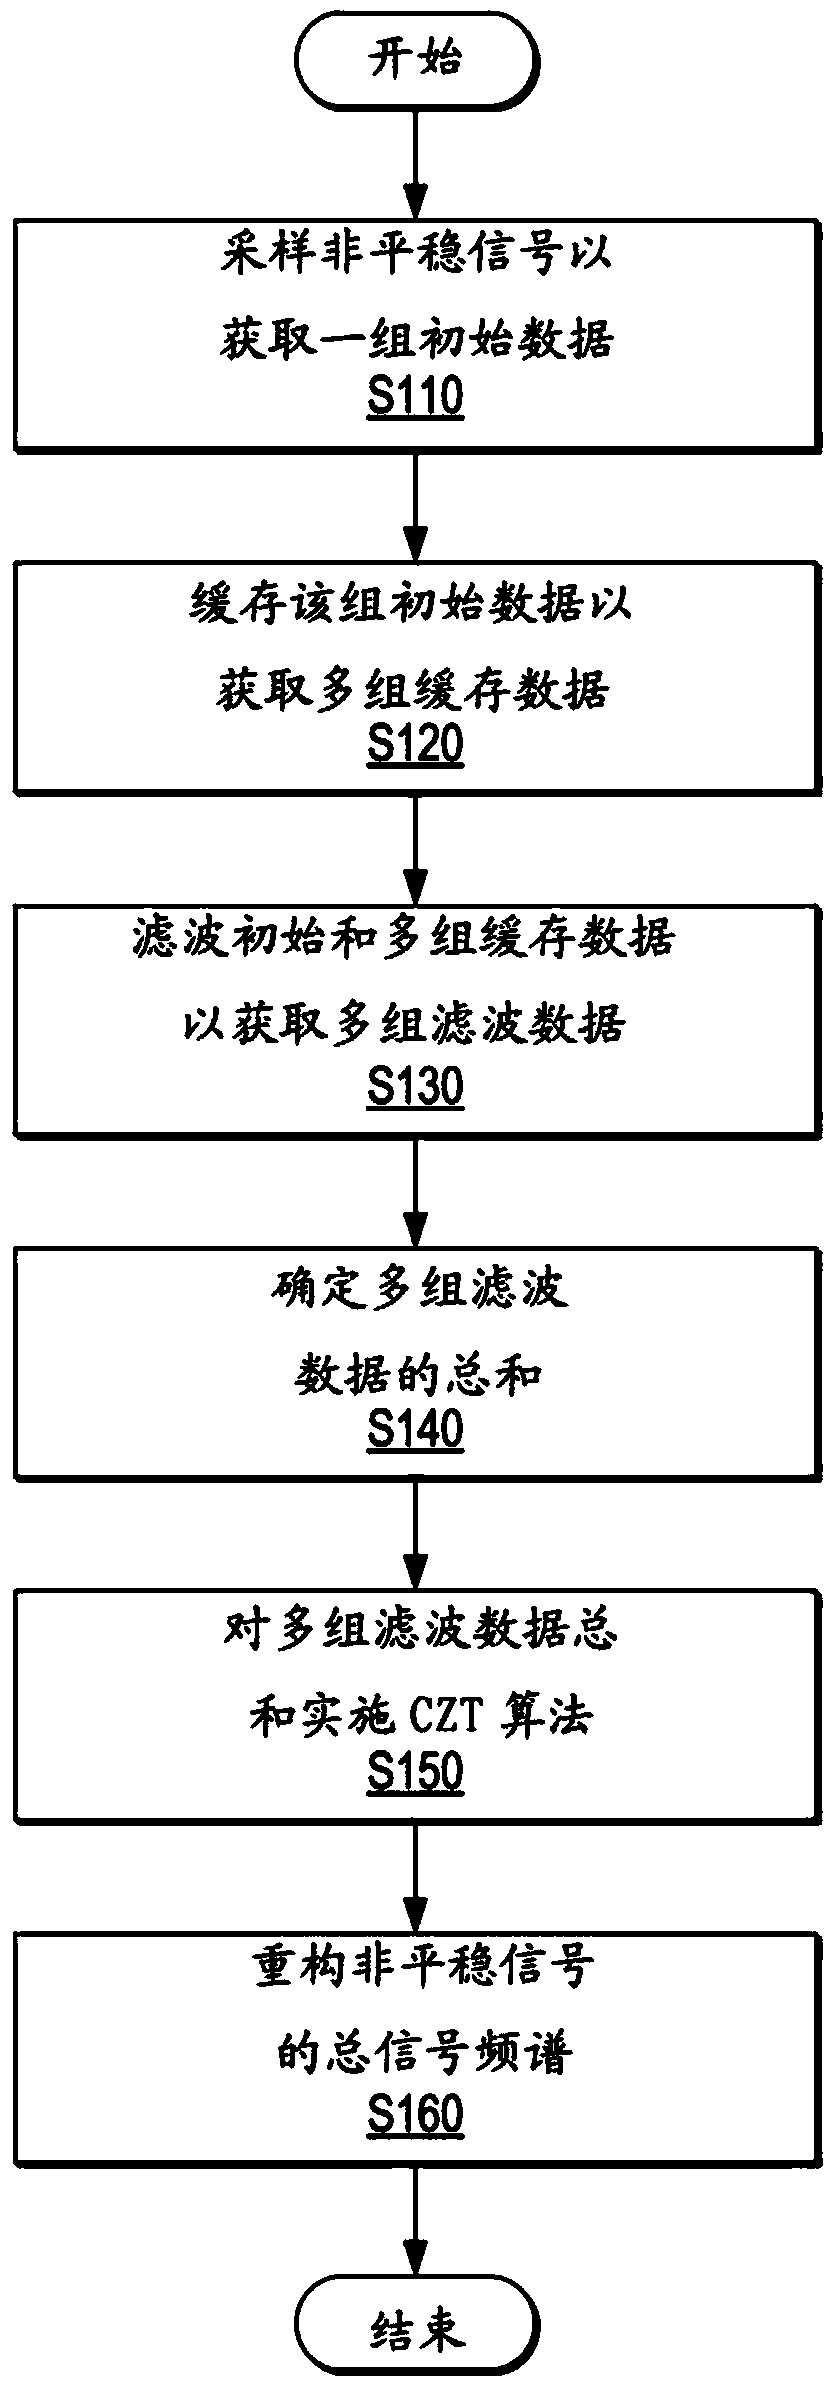 Method and system for performing real-time spectral analysis of non-stationary signal